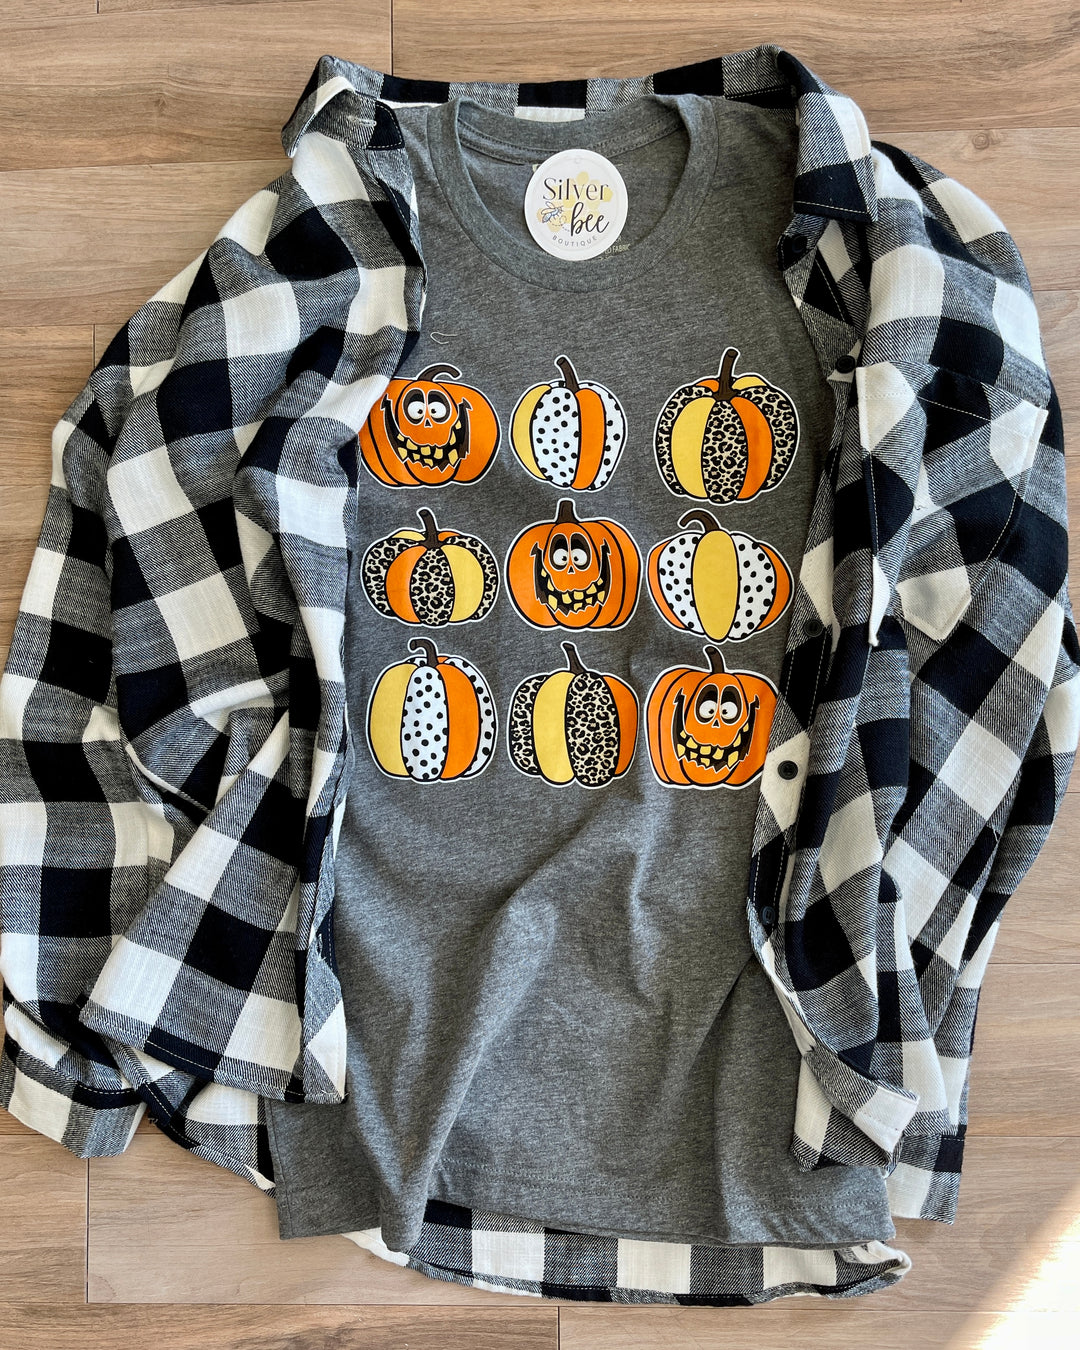 soft grey tee with 9 patterned pumpkins with silly faces, paired with black and white flannel (items sold separately)